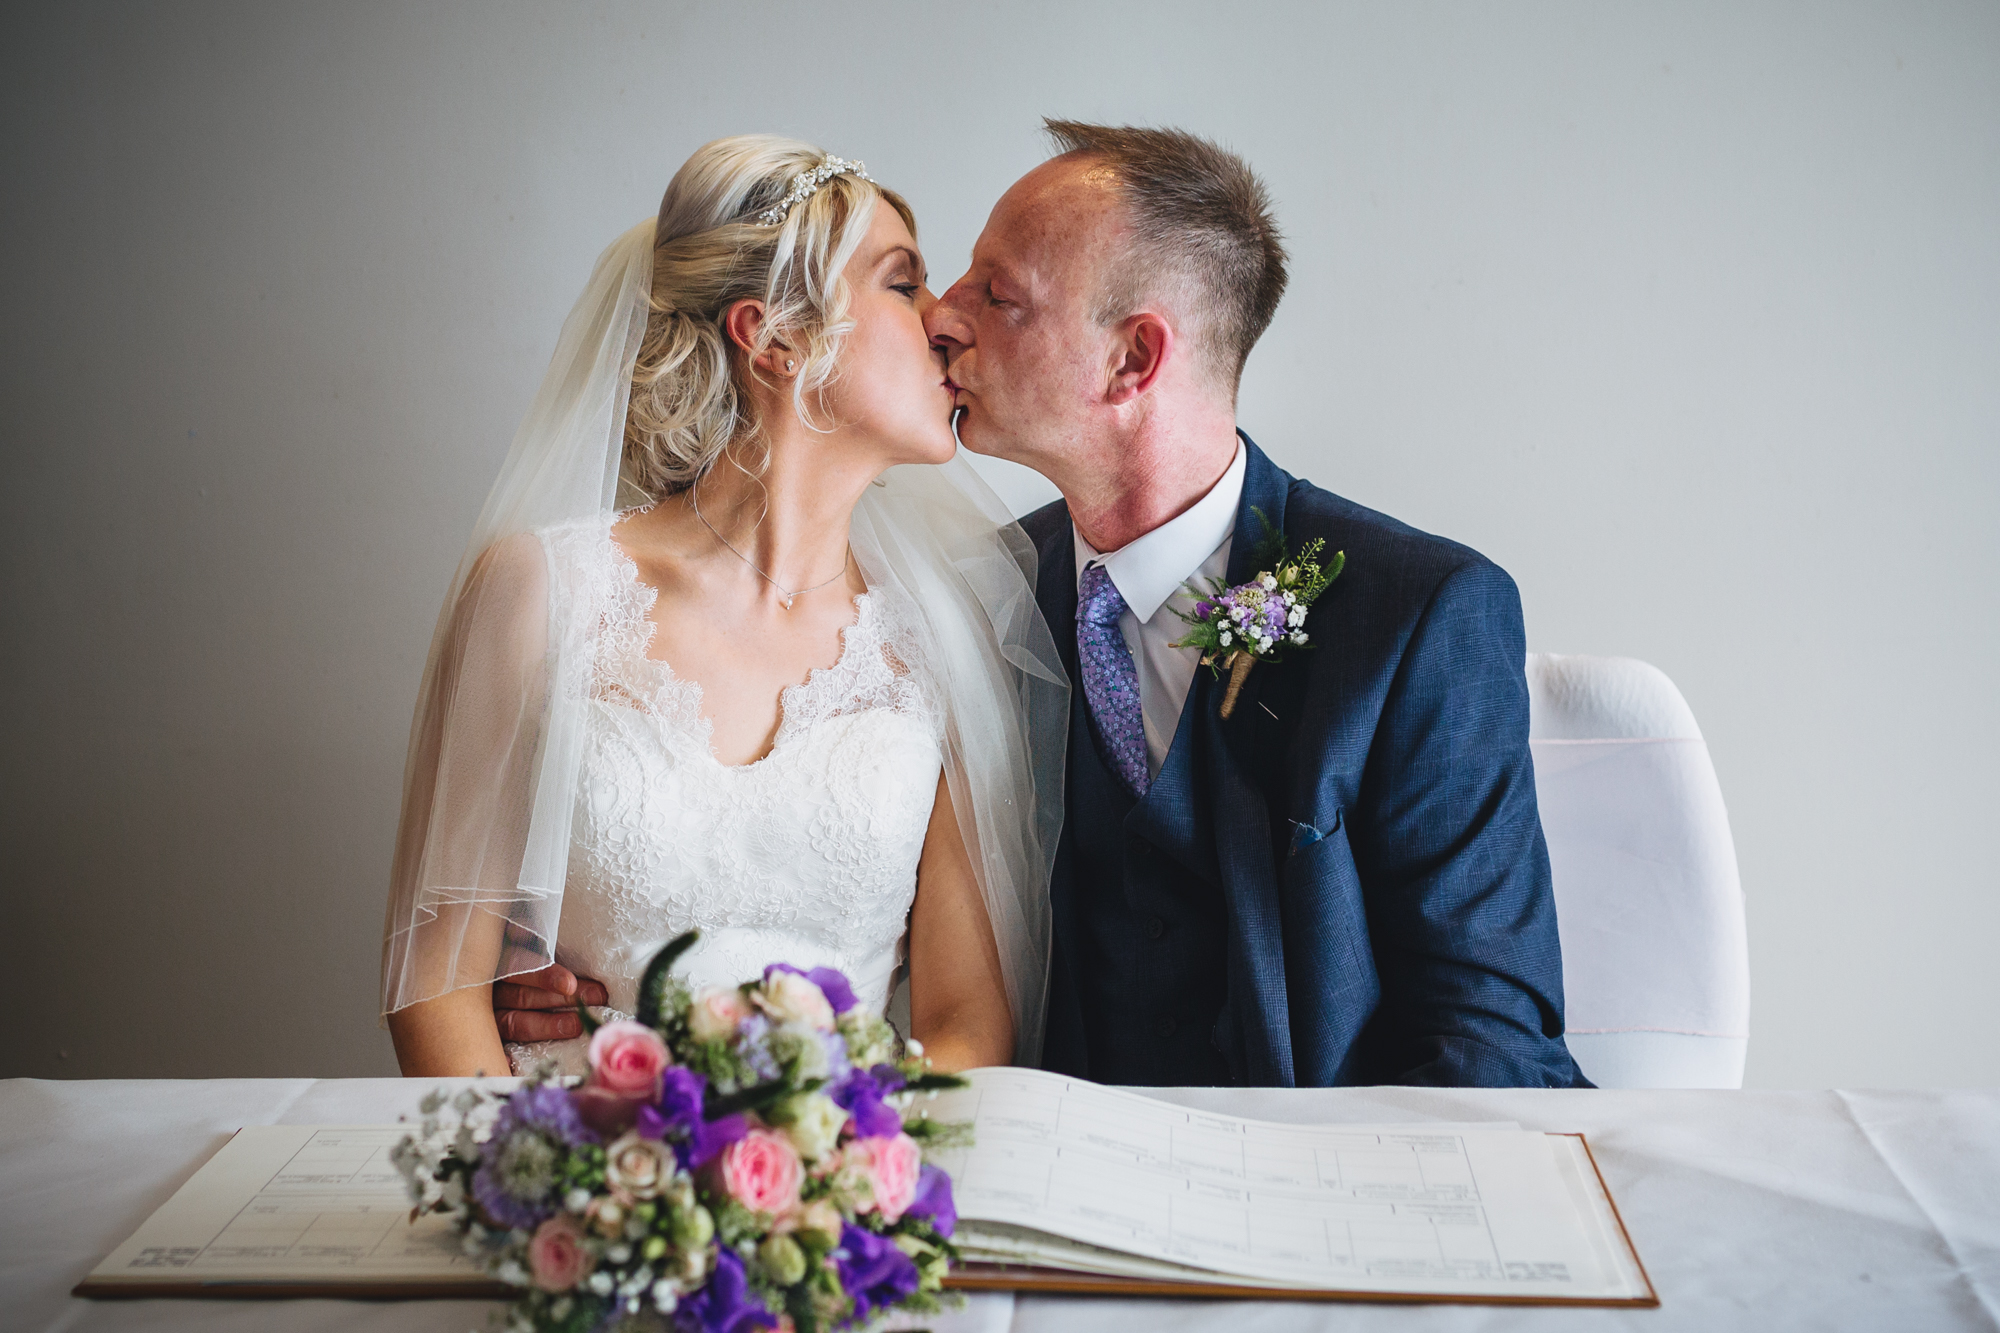 First kiss after getting married at  Park Plaza Hotel, Cardiff weddings